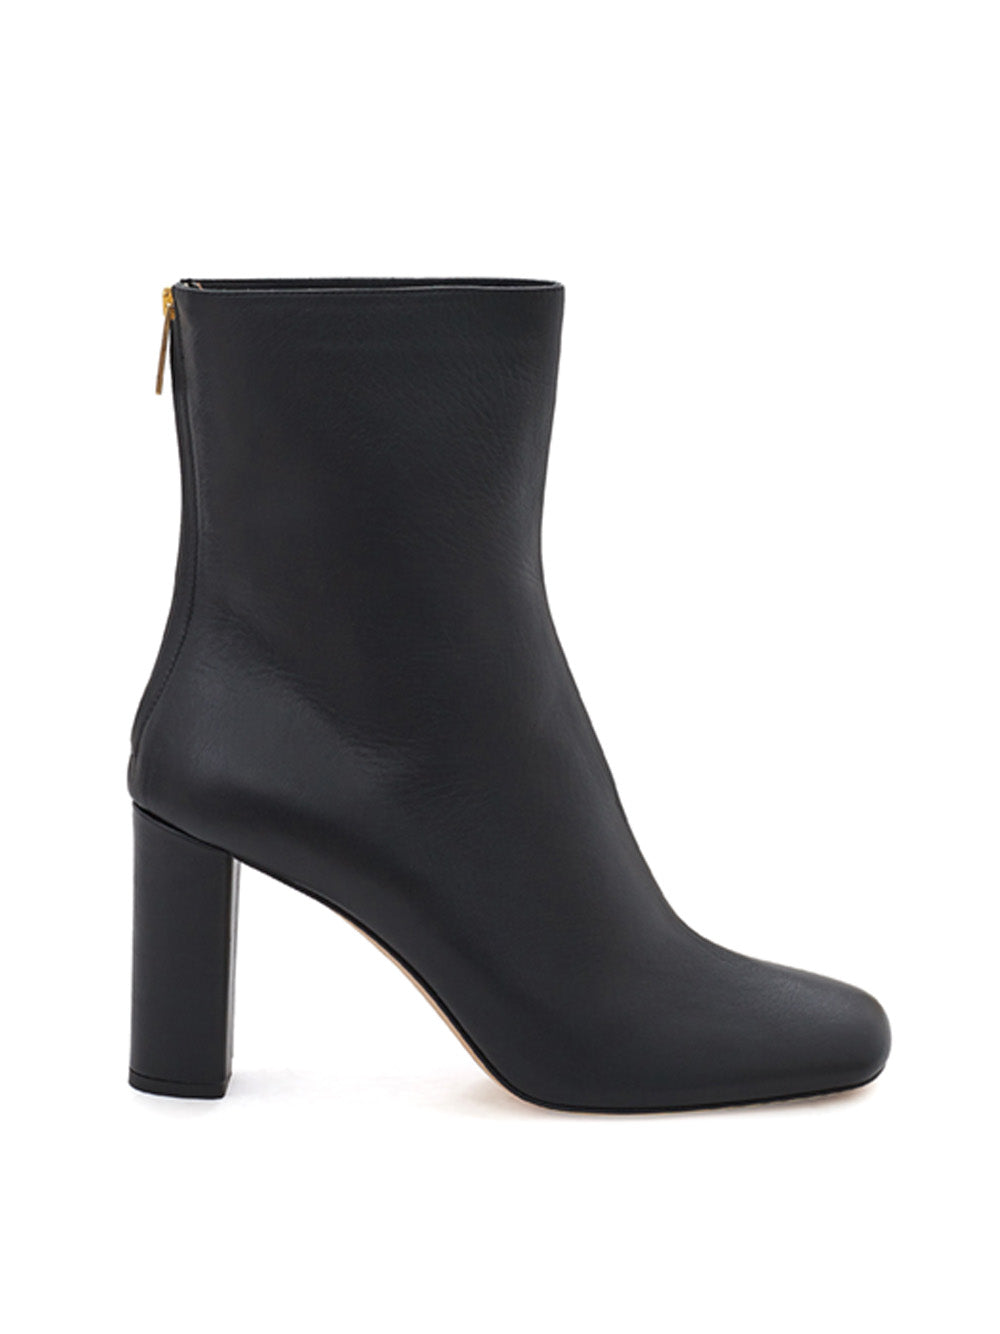 Black ankle boot with zip Paris Texas